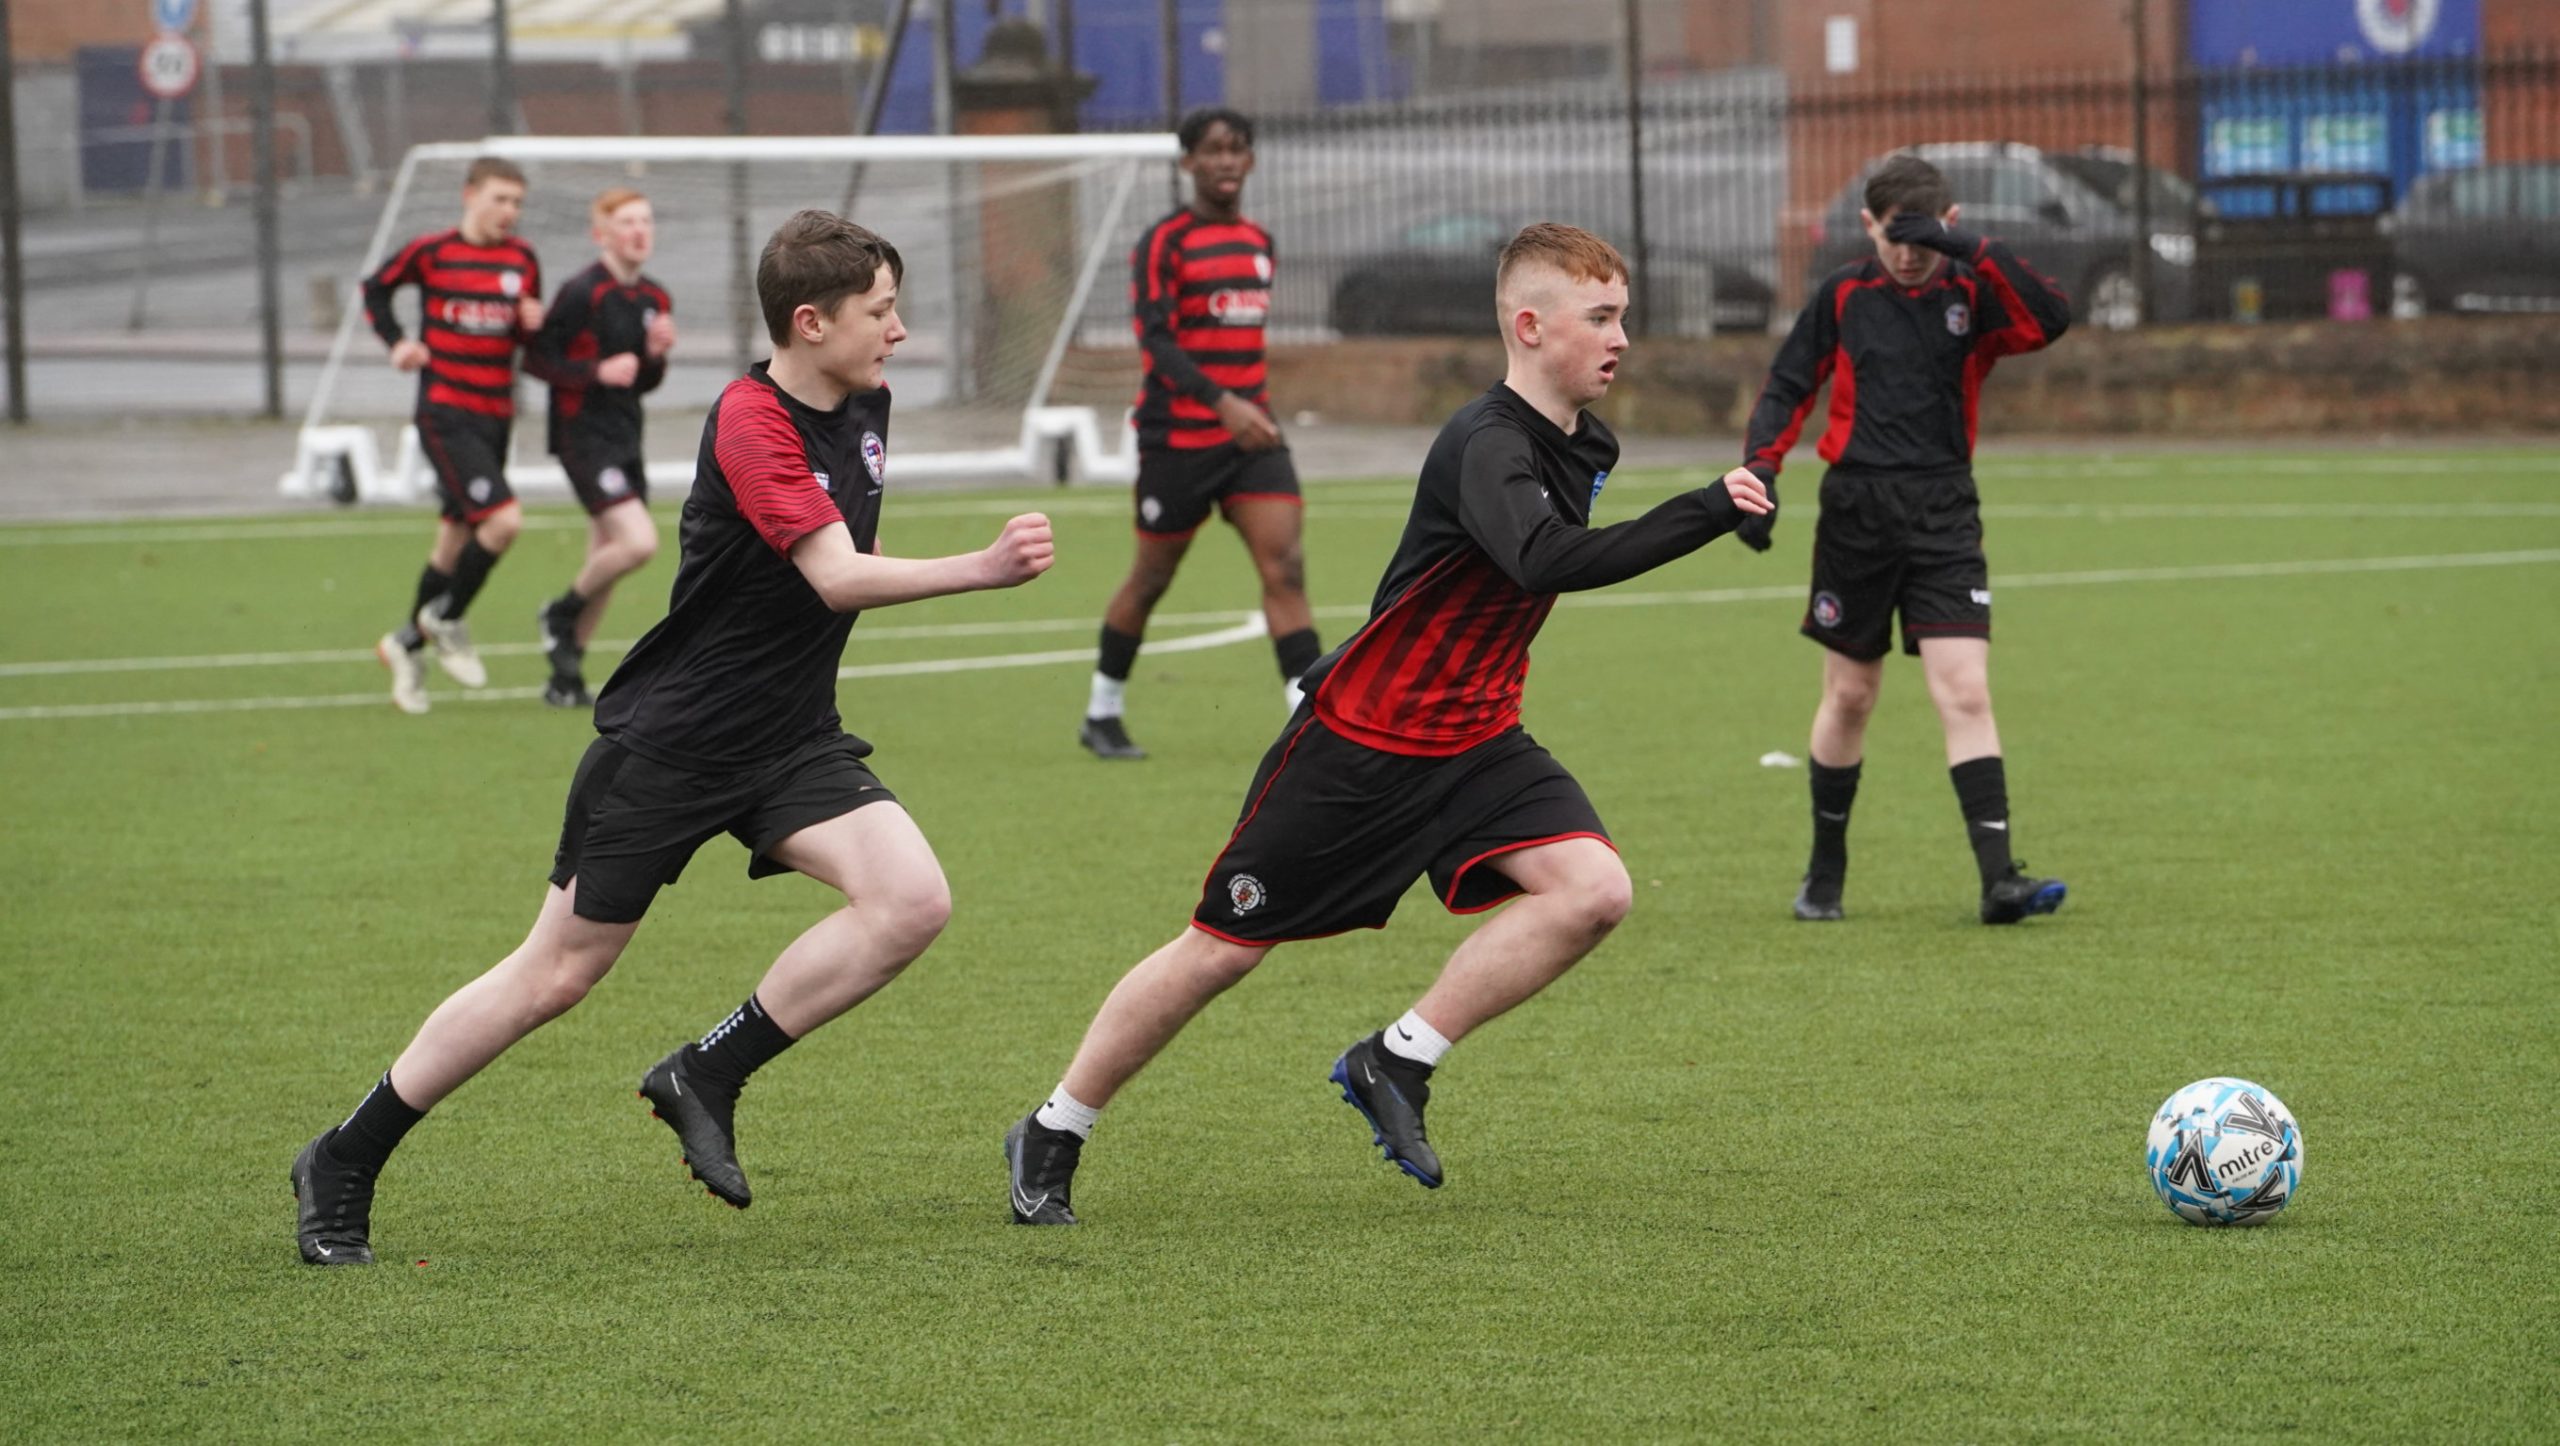 Two male school pupils playing football